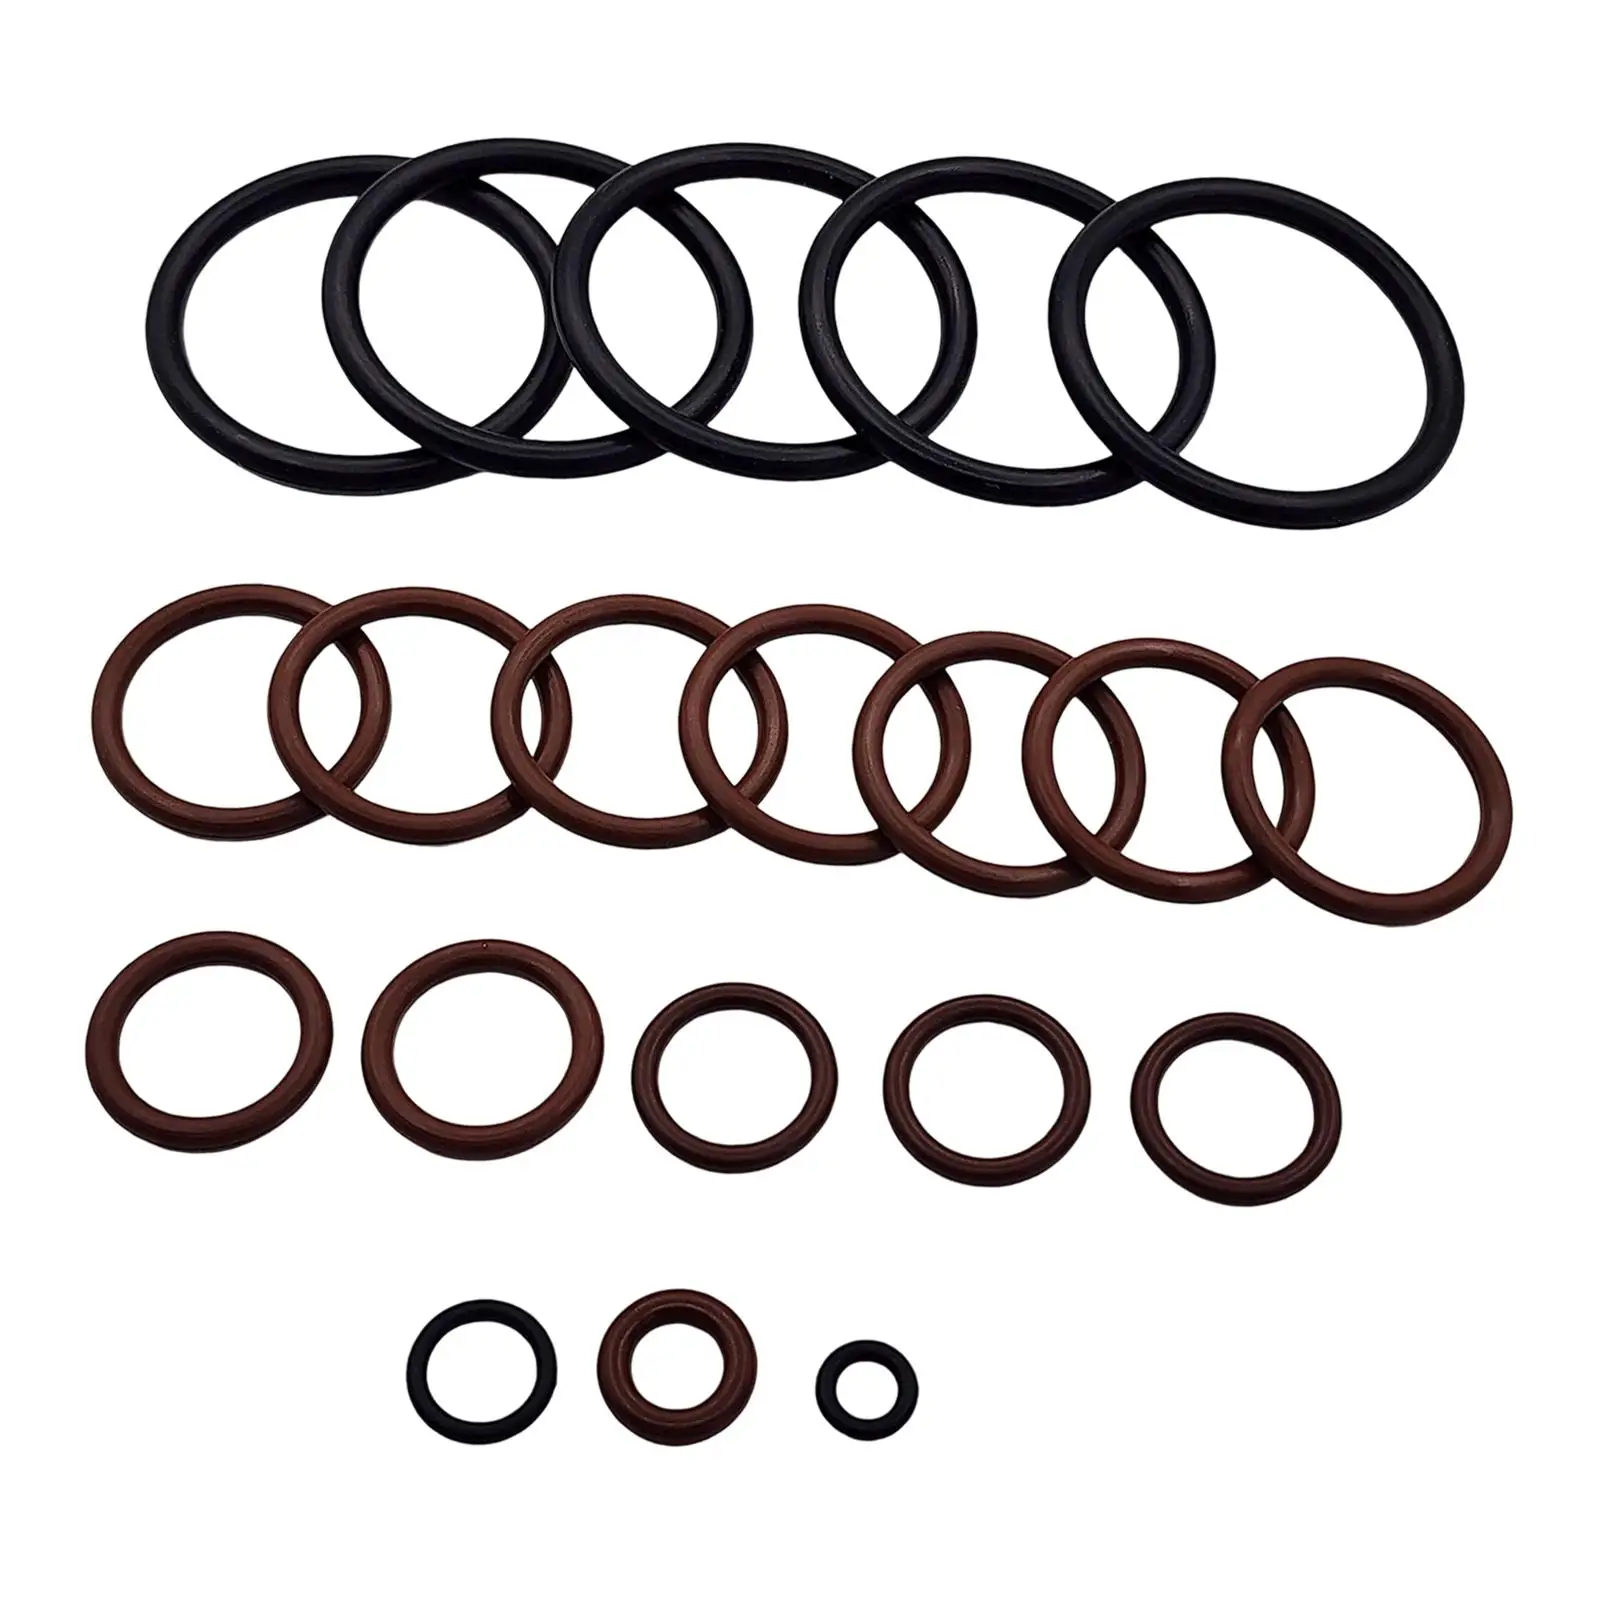 Cooling System O-Ring Kit Professional Washer for BMW E46 M52 M54 Hose